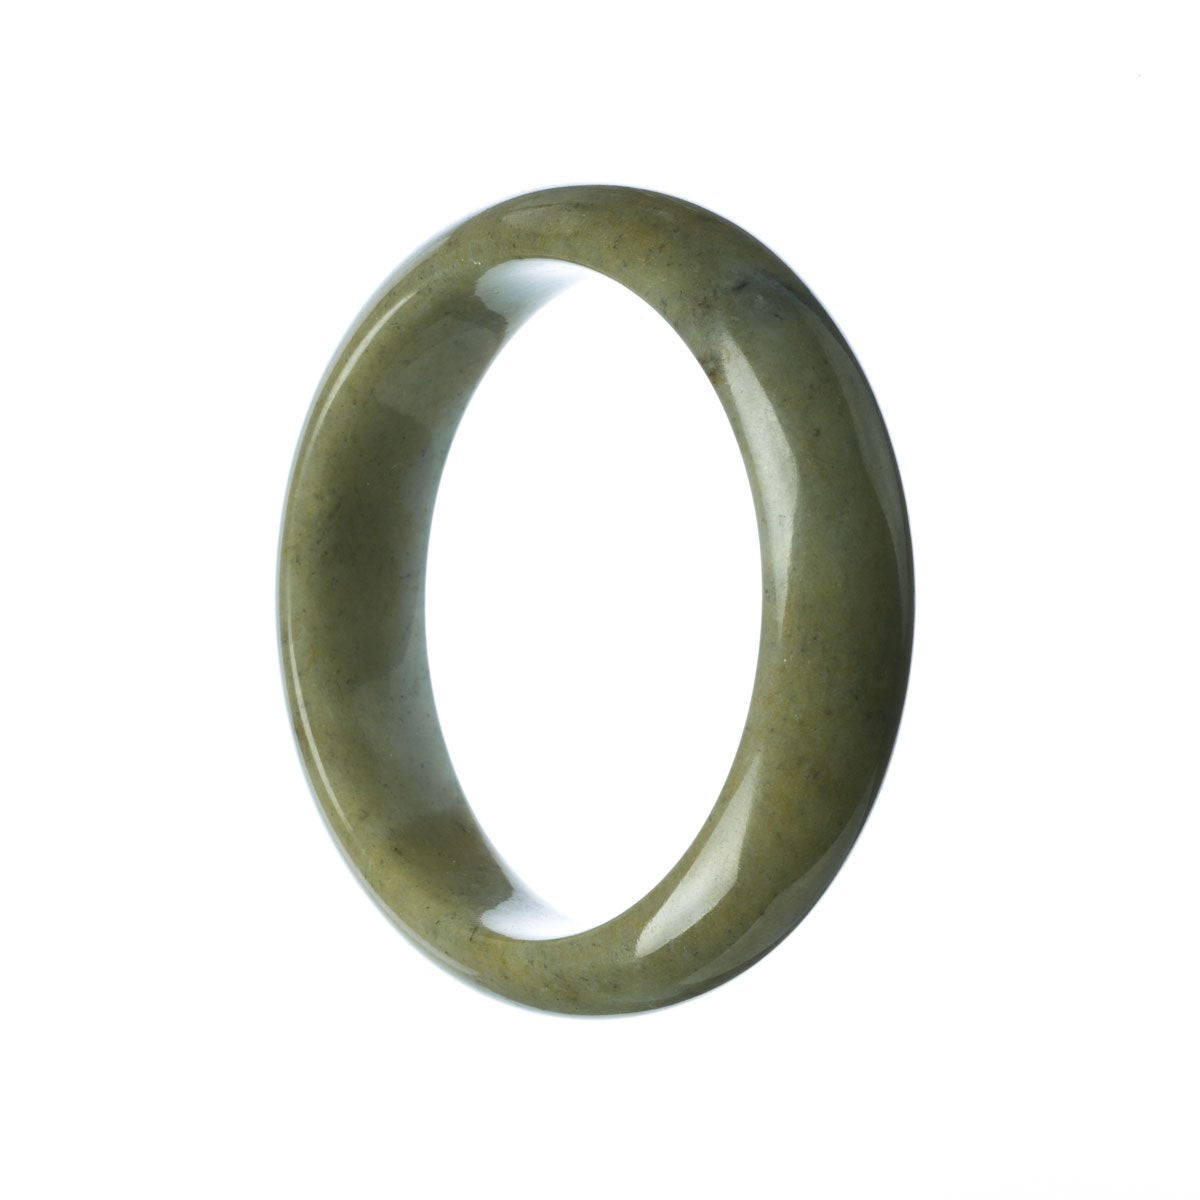 A close-up image of a Grade A grey brown Burmese Jade Bangle with a half moon shape. The bangle is certified and has a diameter of 59mm. It is a product by MAYS™.